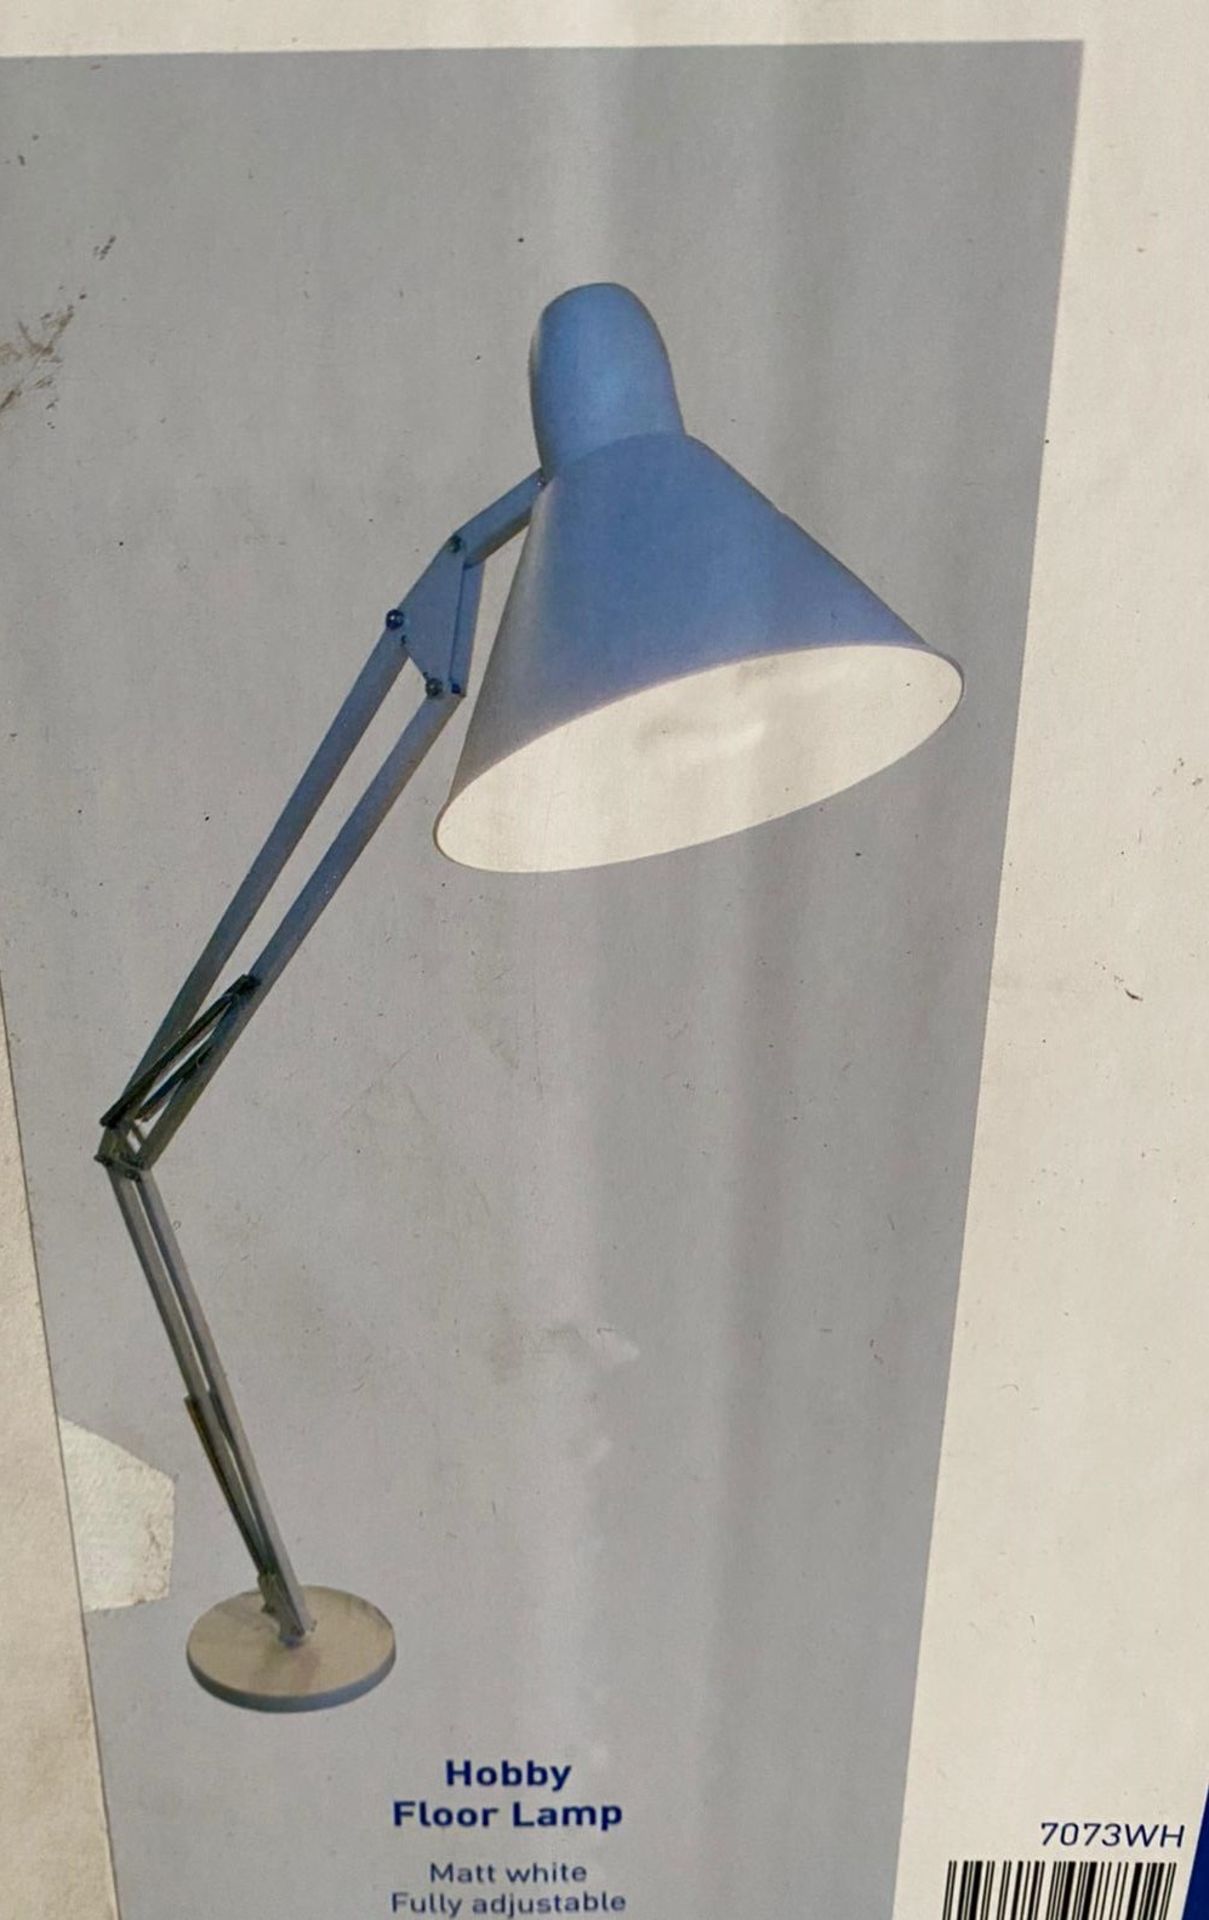 1 x Searchlight Hobby Floor Lamp in matt white - Ref: 7073WH - New and Boxed - RRP: £180 - Image 4 of 4